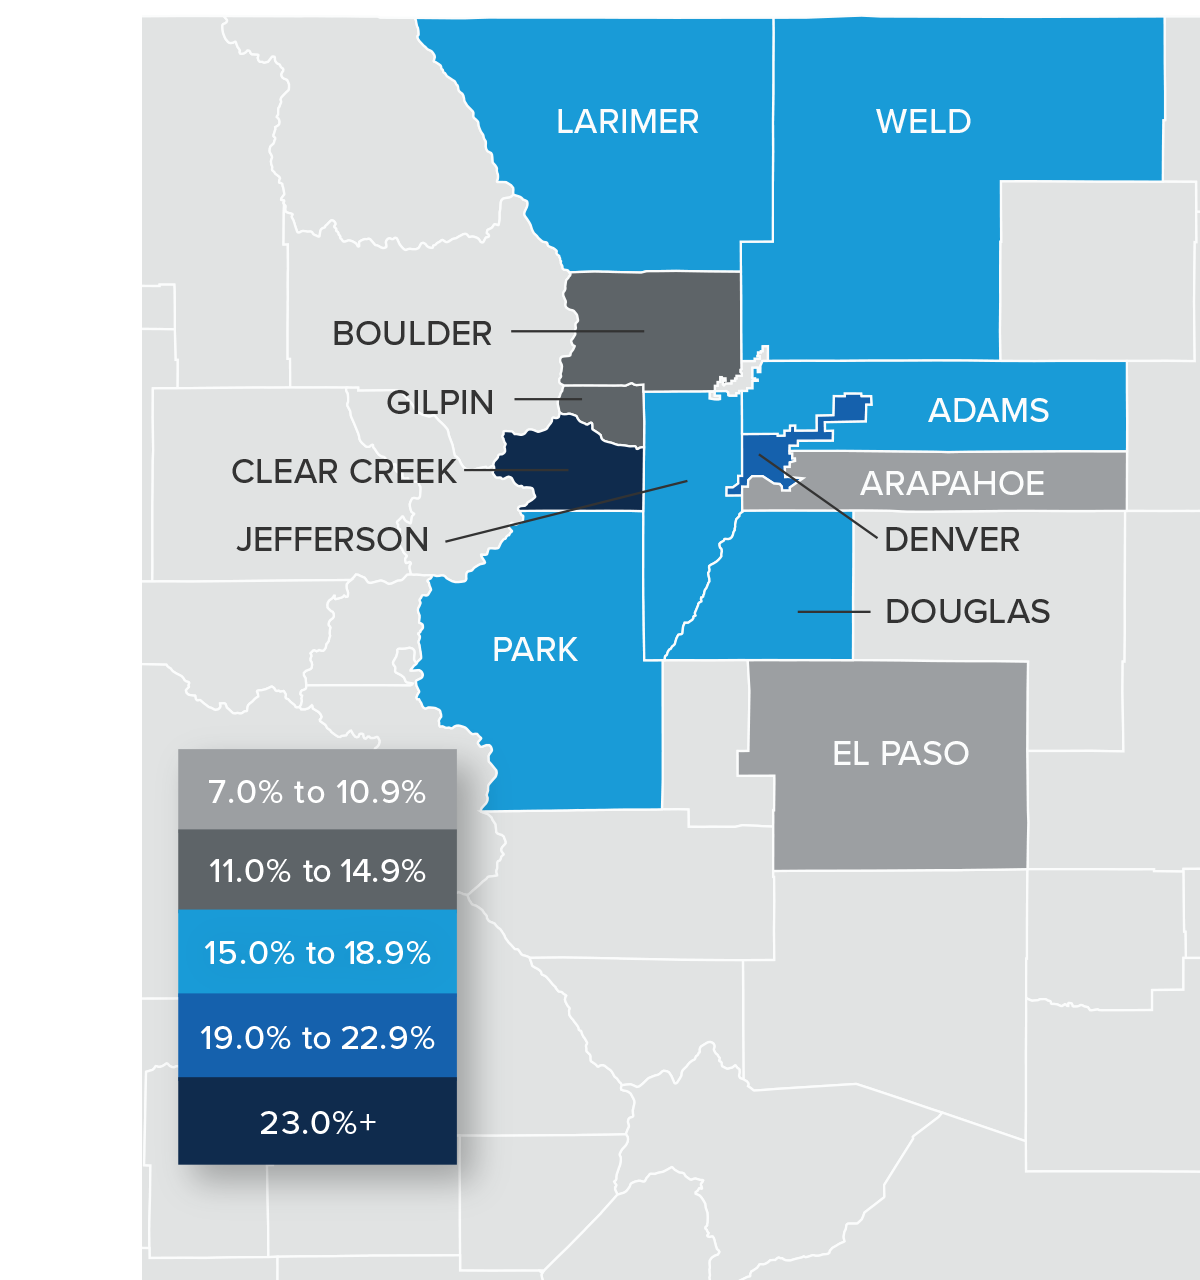 A map showing the real estate home prices percentage changes for various counties in Colorado. Different colors correspond to different tiers of percentage change. El Paso and Arapahoe Counties are the only counties with a percentage change in the 7% to 10.9% range, Boulder and Gilpin counties are in the 11% to 14.9% change range, Larimer, Weld, Adams, Park, Jefferson, and Douglas are in the 15% to 18.9% change range, Denver County is in the 19% to 22.9% change range, and Clear Creek County is the sole county in the 23% + change range.